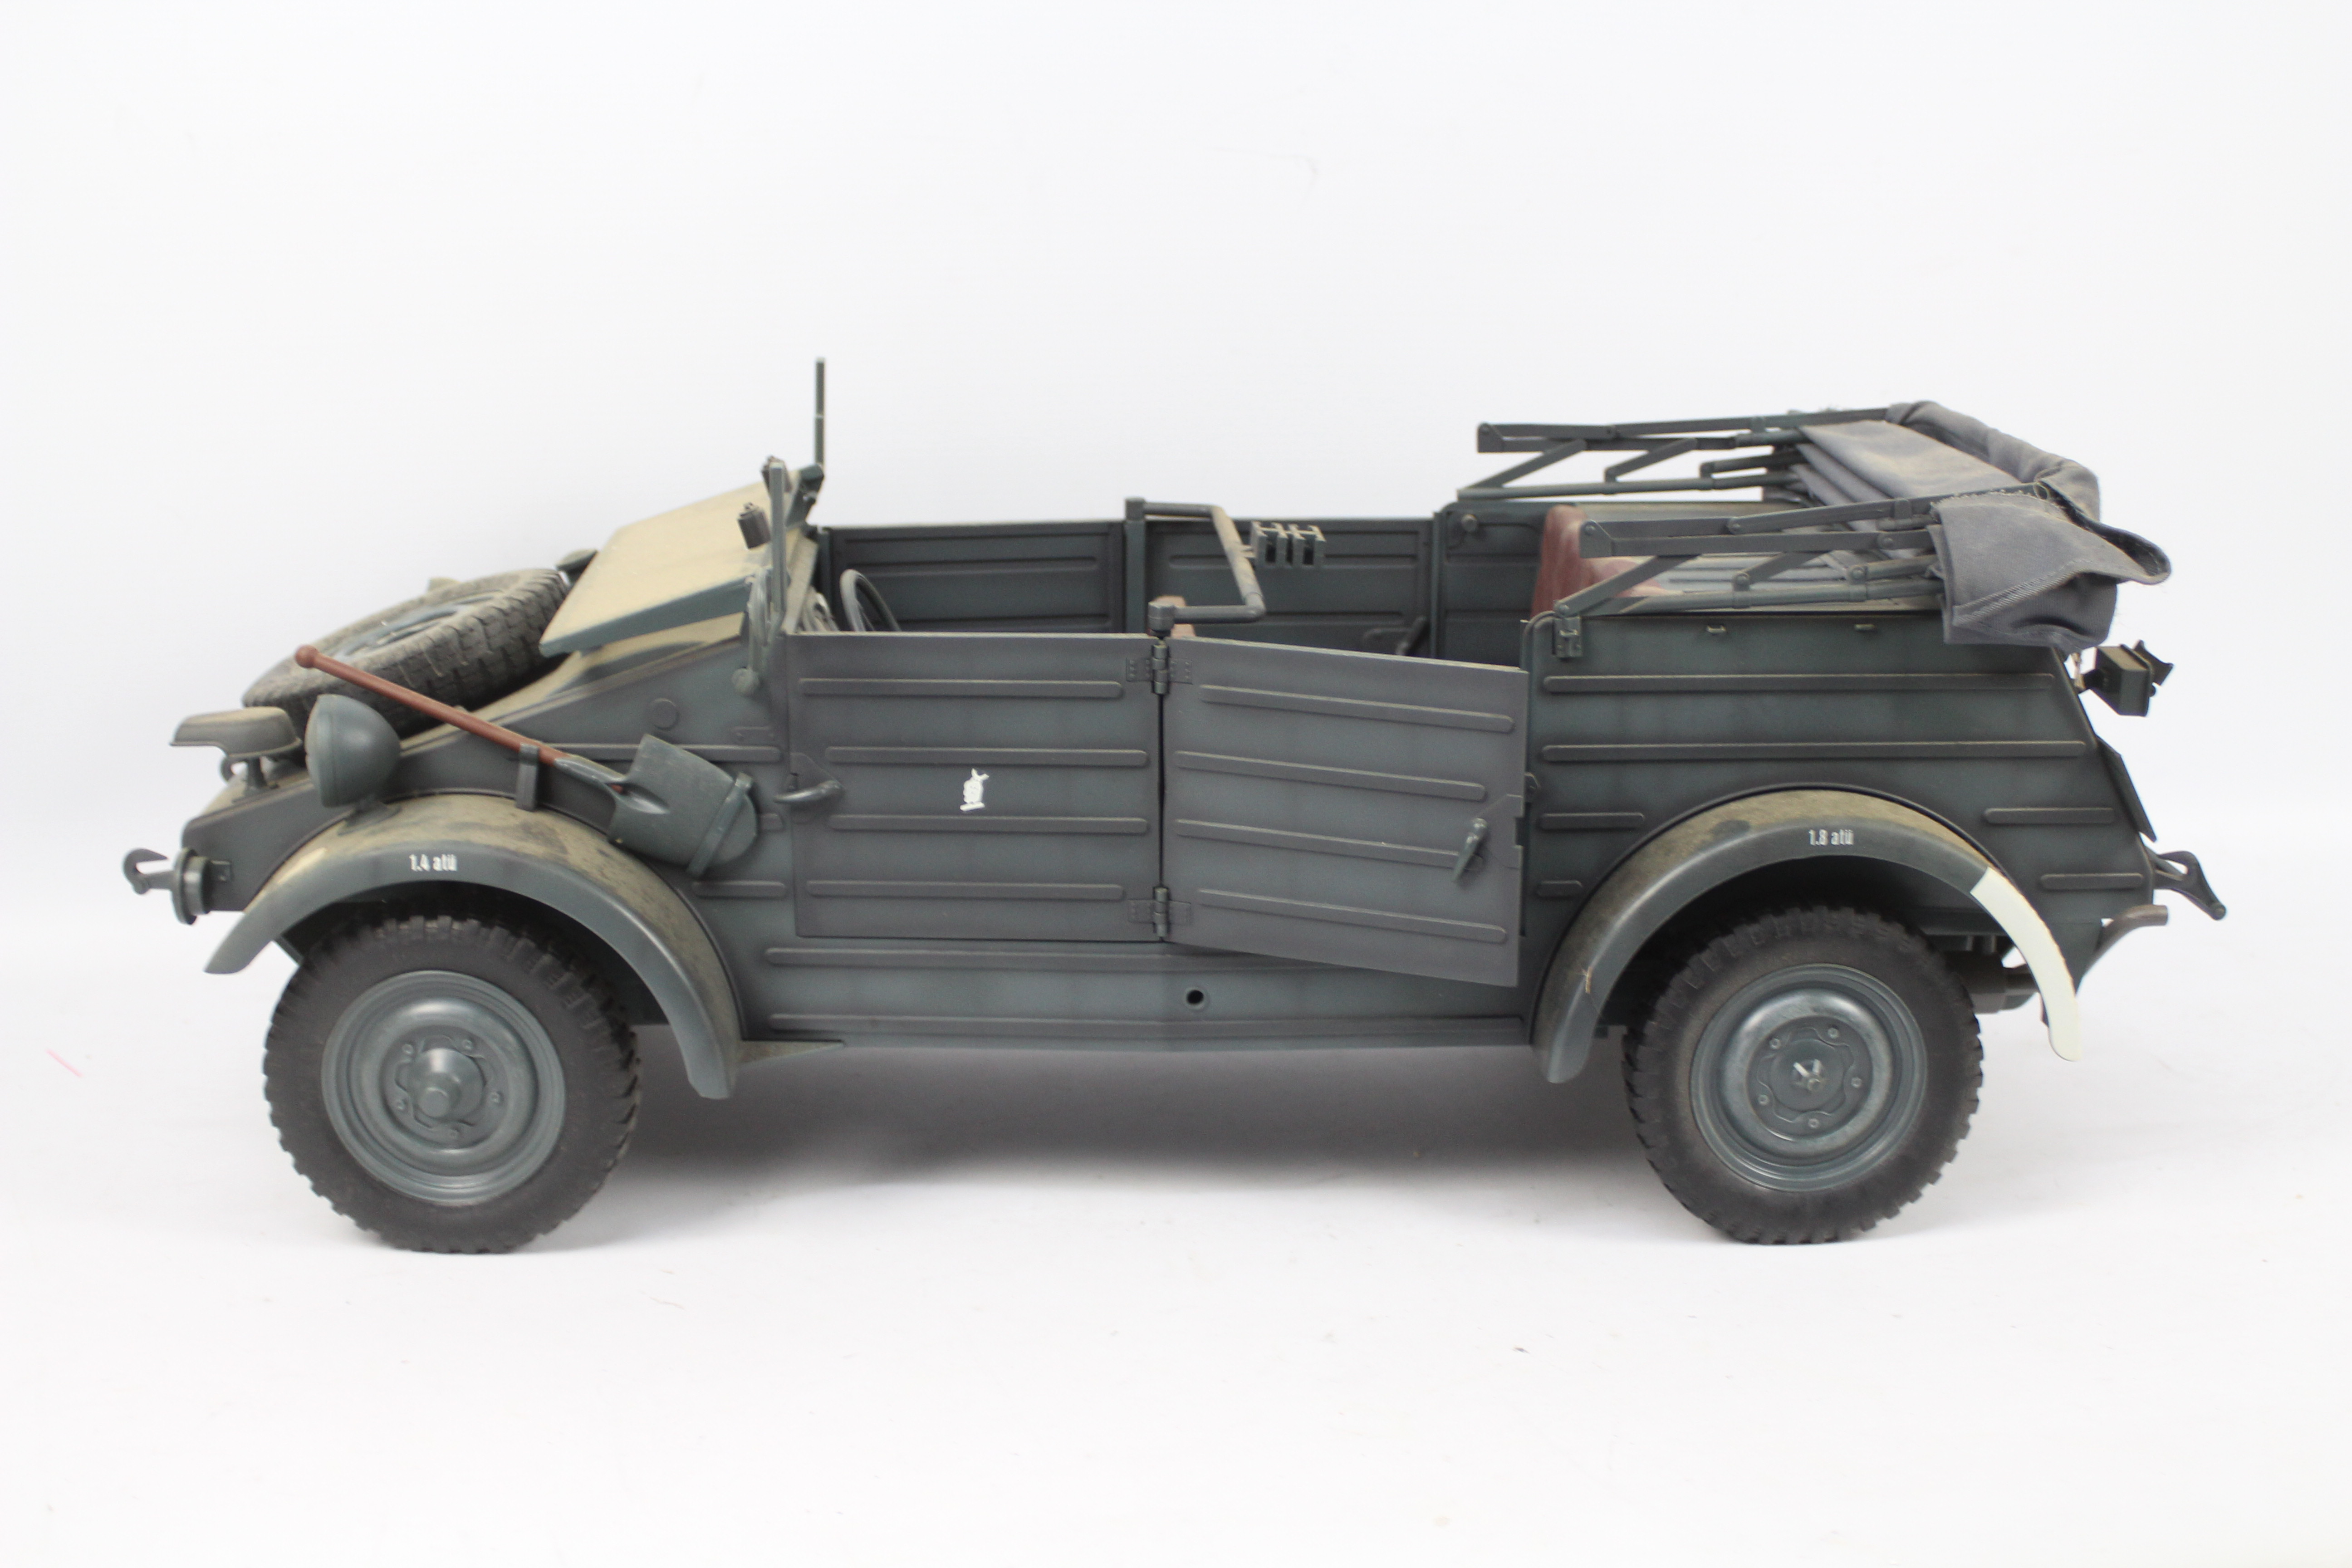 Dragon - A boxed Dragon #710150 WWII German Forces 1:6 scale Kubelwagen Type 82. - Image 4 of 10